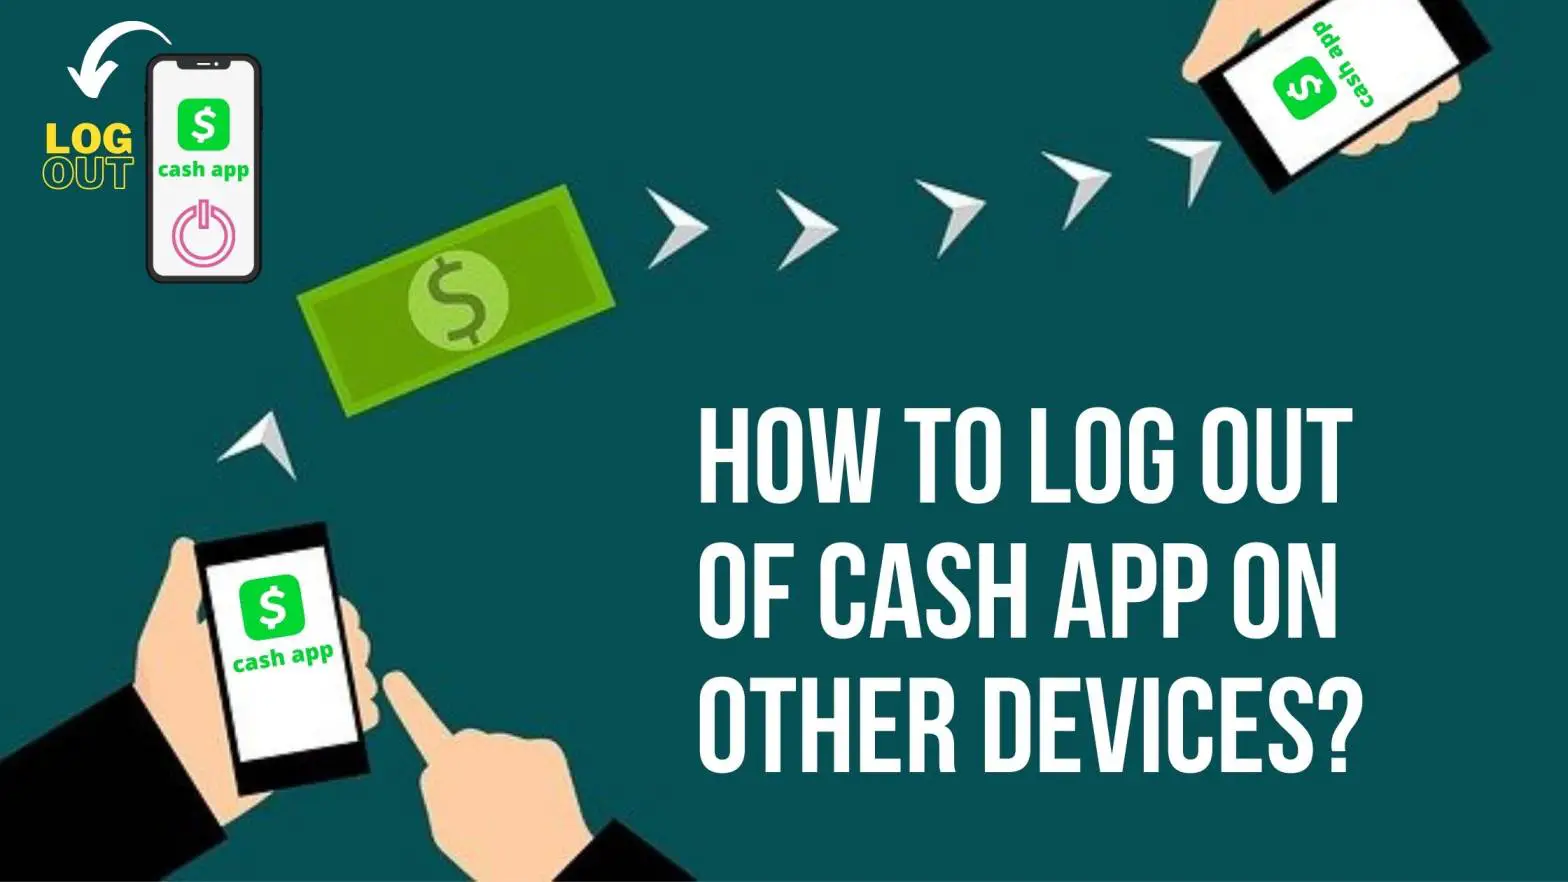 How to Log Out of Cash App on Other Devices